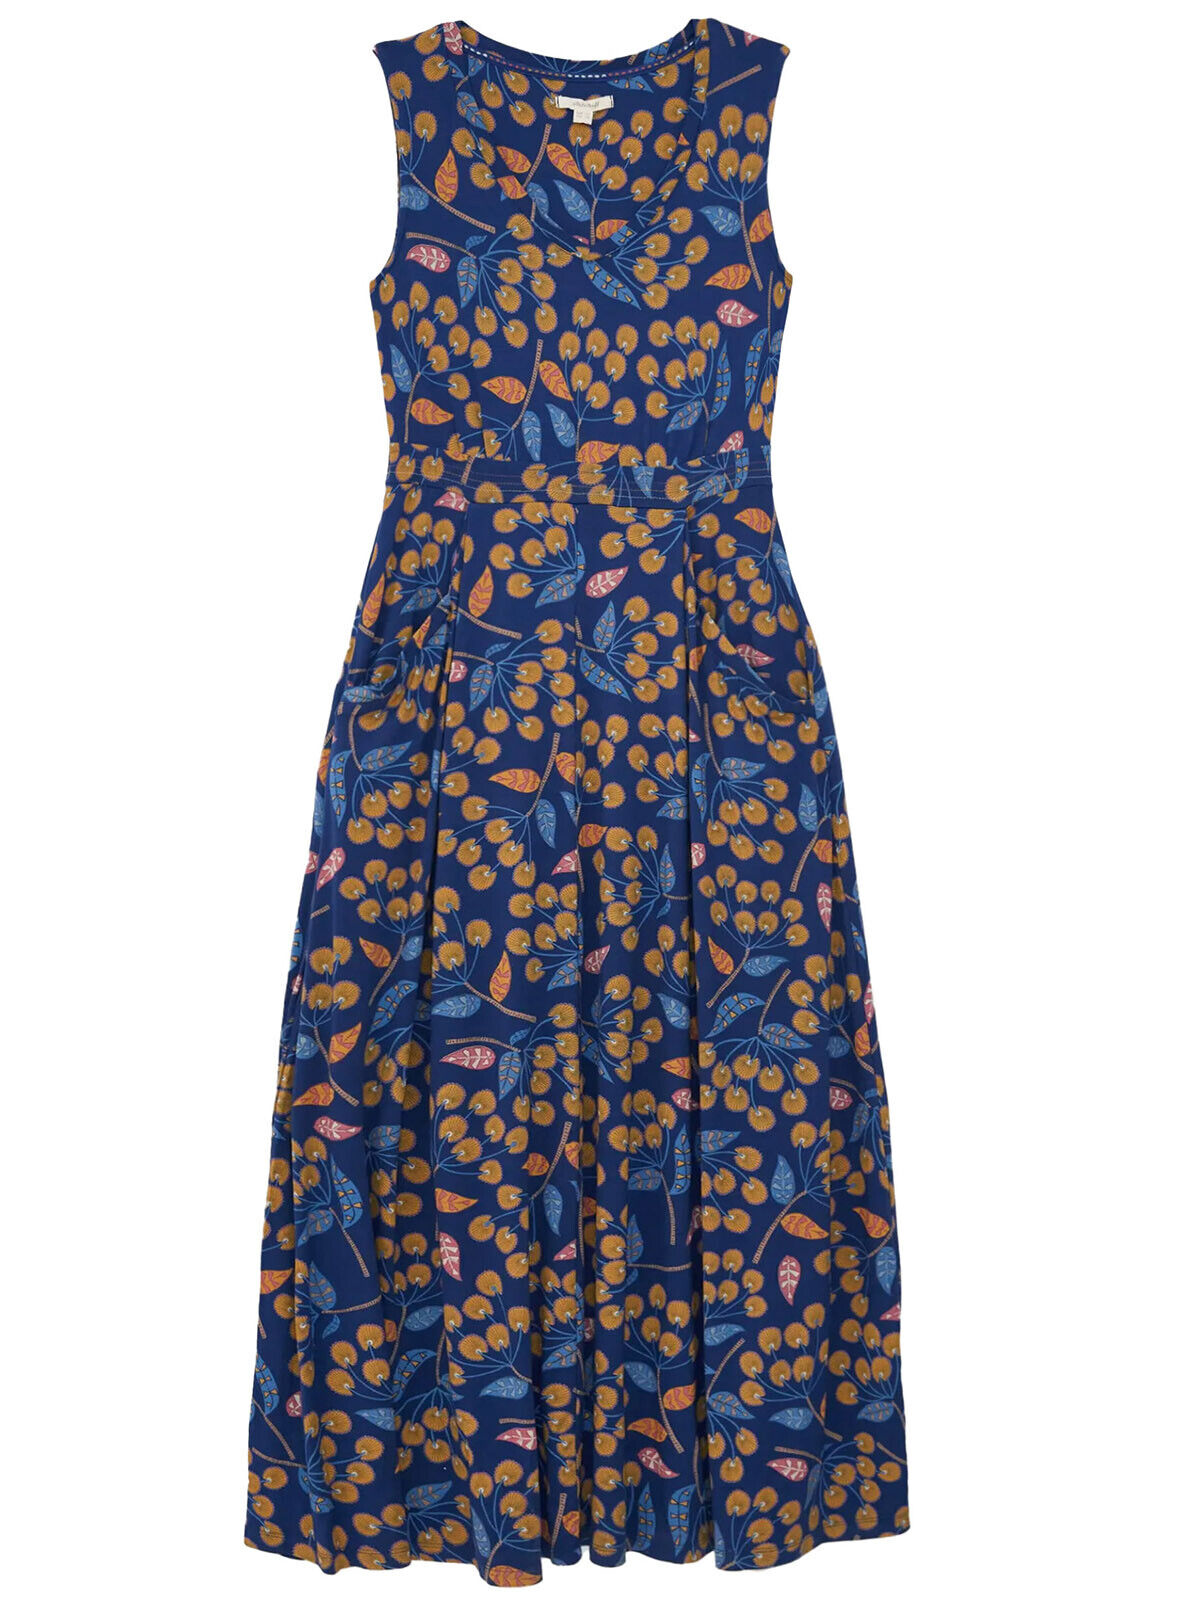 EX WHITE STUFF Blue Sophie Maxi Dress in Sizes 10, 12, 14, 16 RRP £59